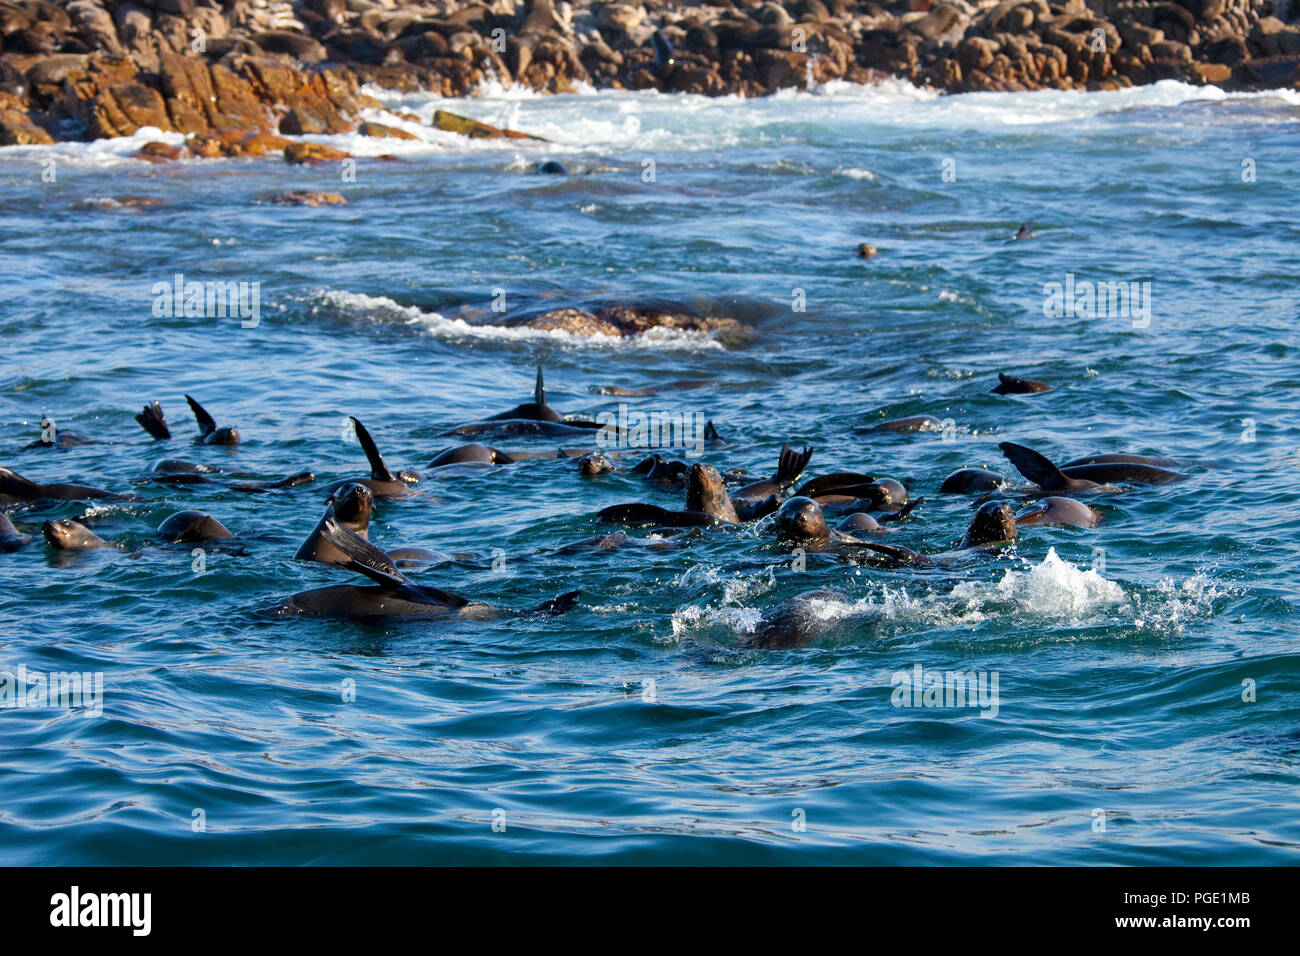 Cape fur seals in the water, Geyser Rock, South Africa. Stock Photo